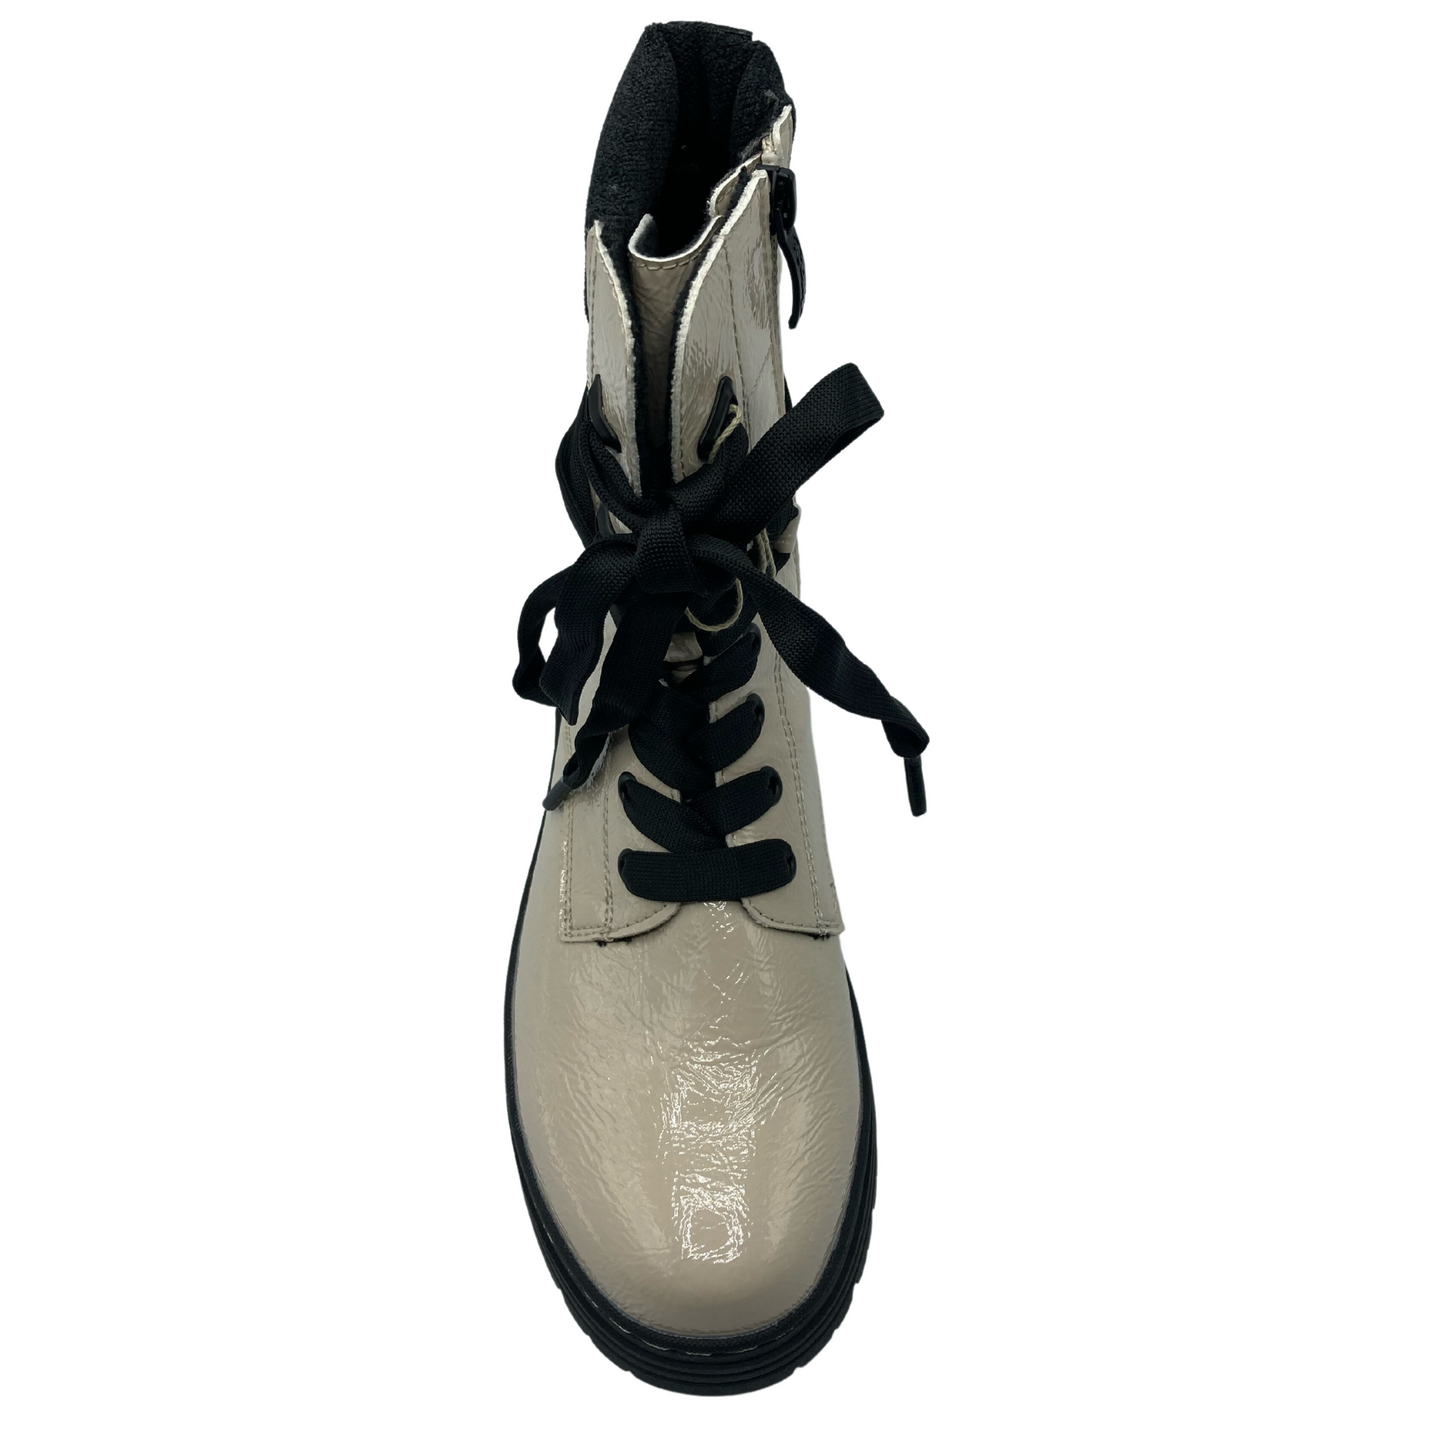 Front facing view of beige patent short boot with black laces and side zipper closure